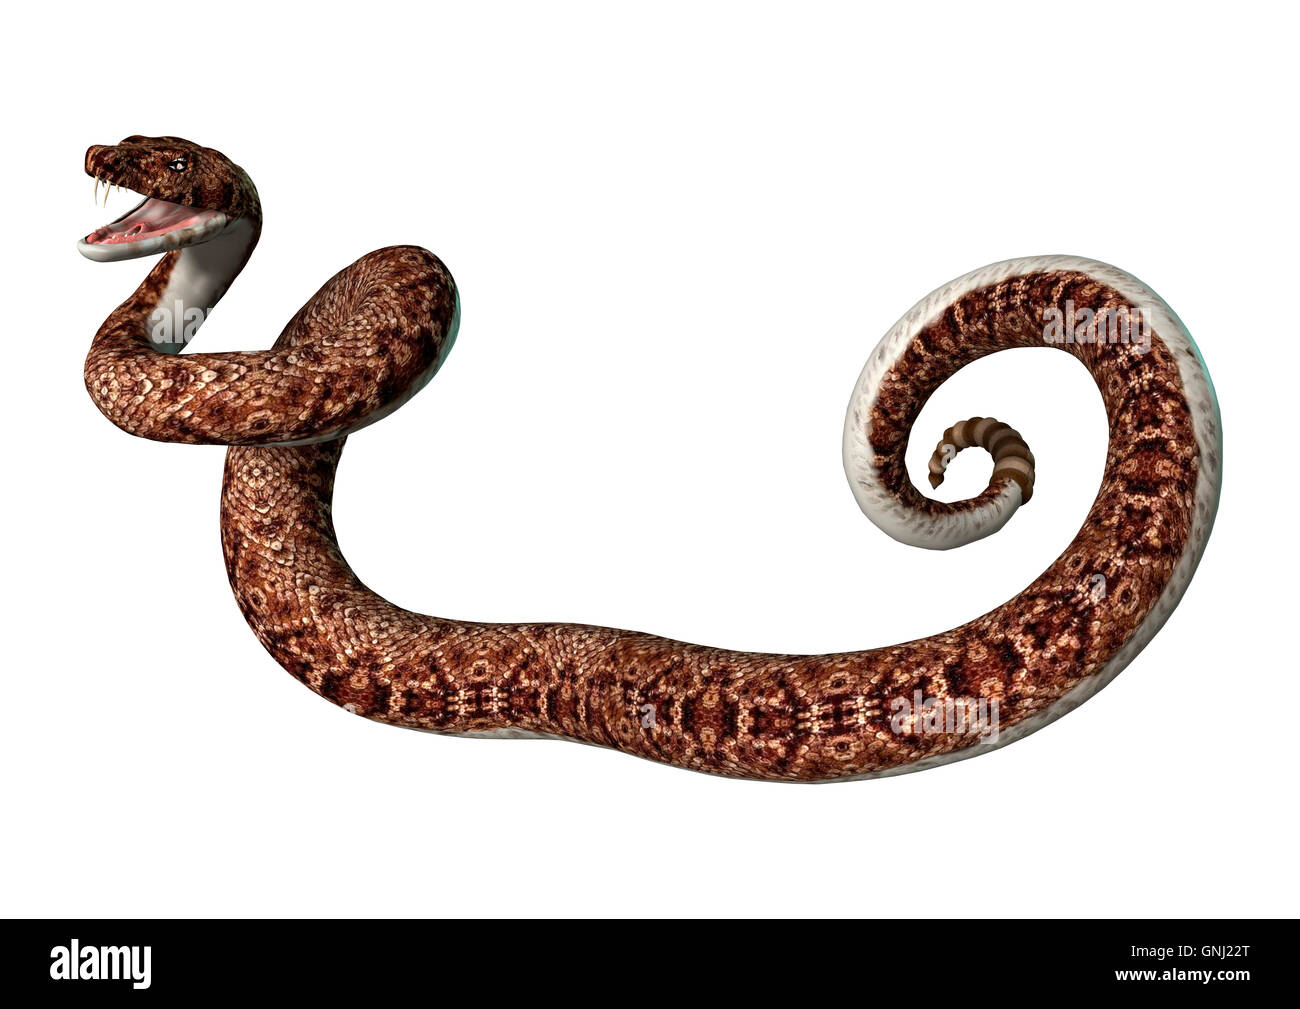 3D rendering of a rattlesnake isolated on white background Stock Photo